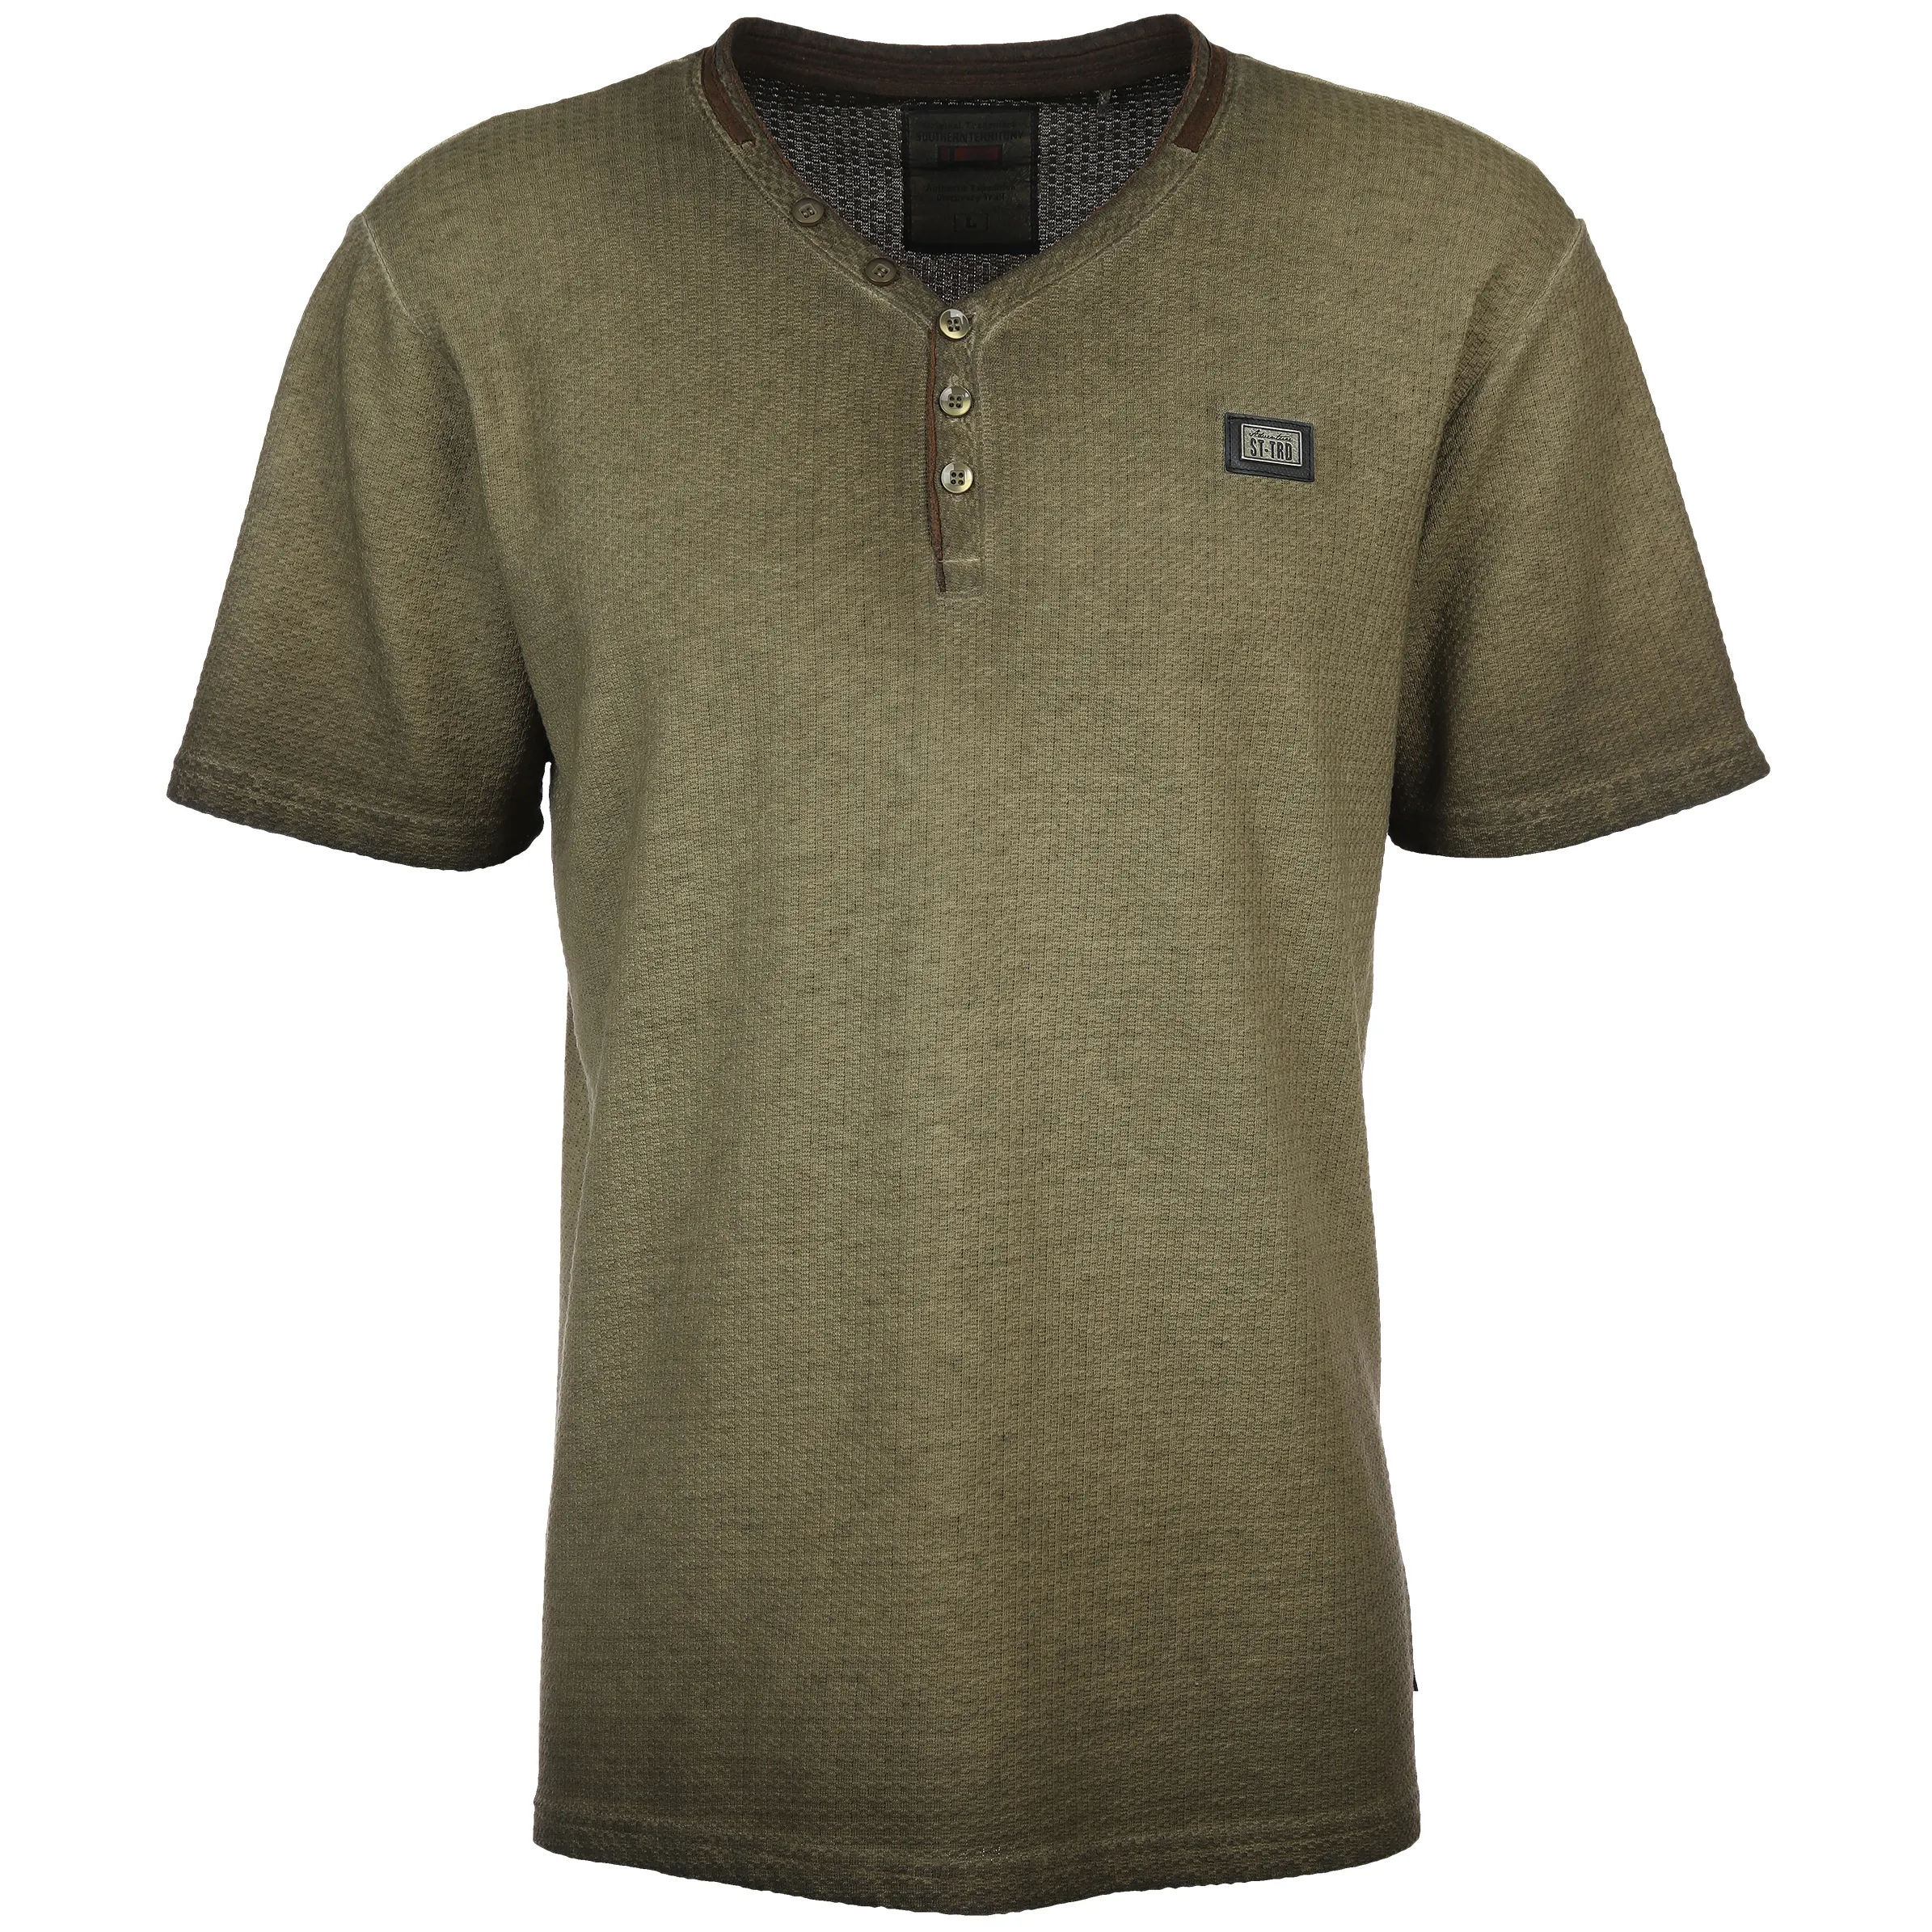 Southern Territory He. Henleyshirt 1/2 Arm suede 2in1 Oliv 886498 OLIVE 1